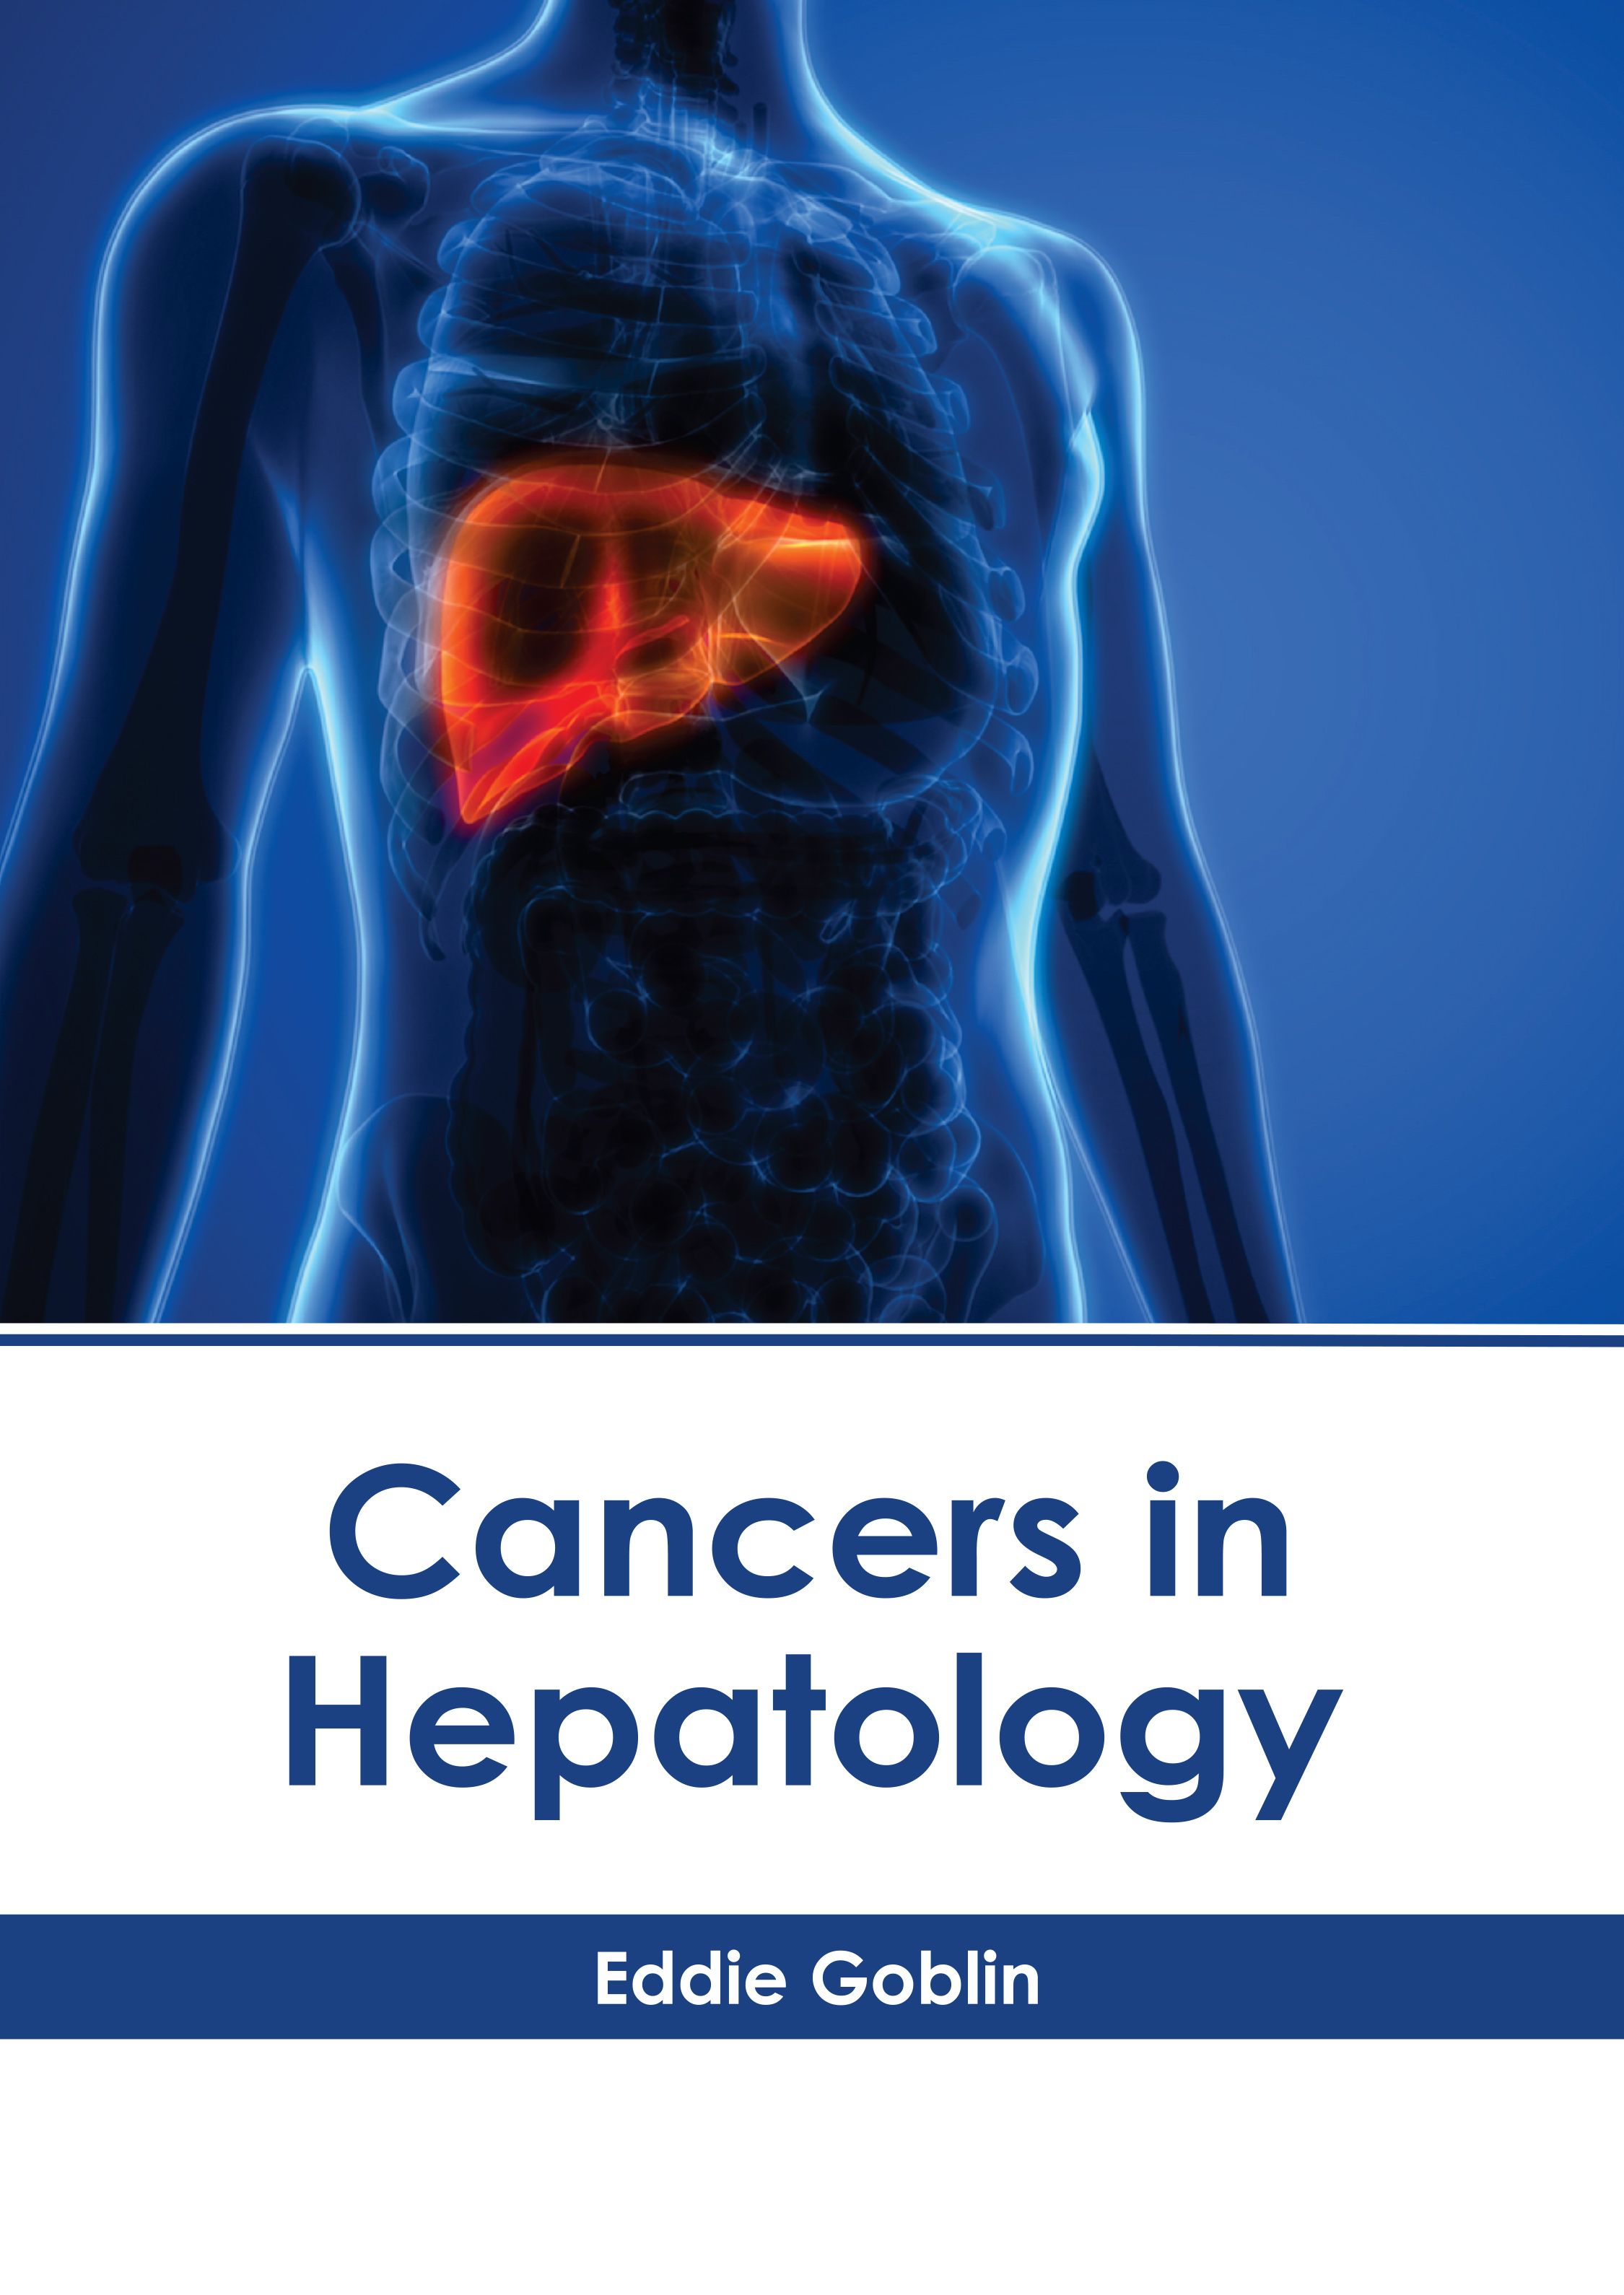 CANCERS IN HEPATOLOGY